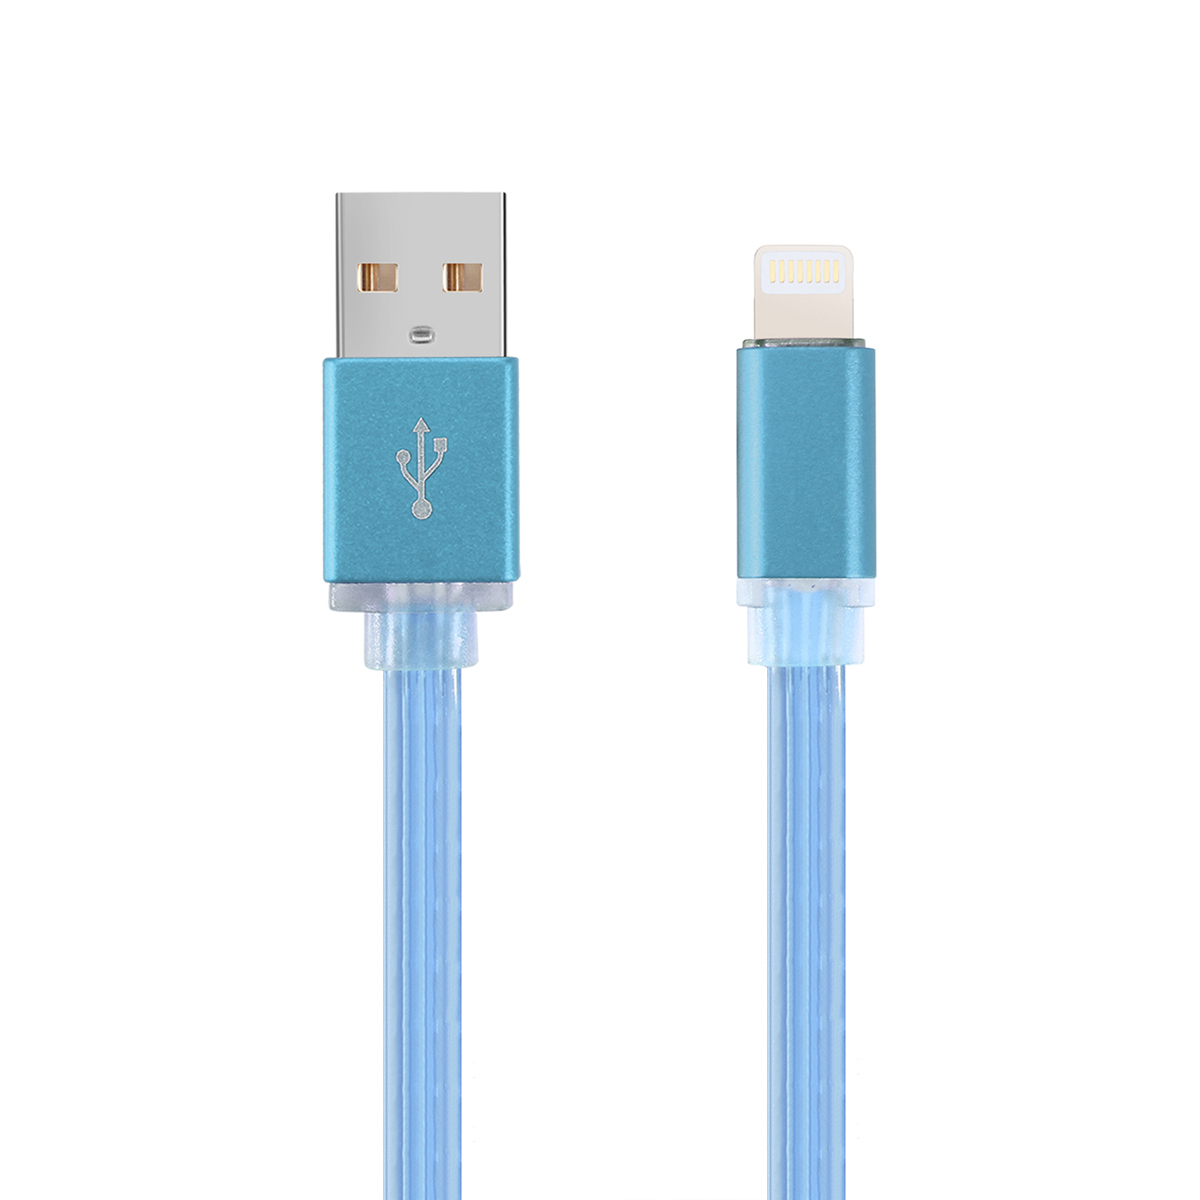 LED 8 pin USB Data Sync Stretche Charging Cable for iPhone 7 - Blue